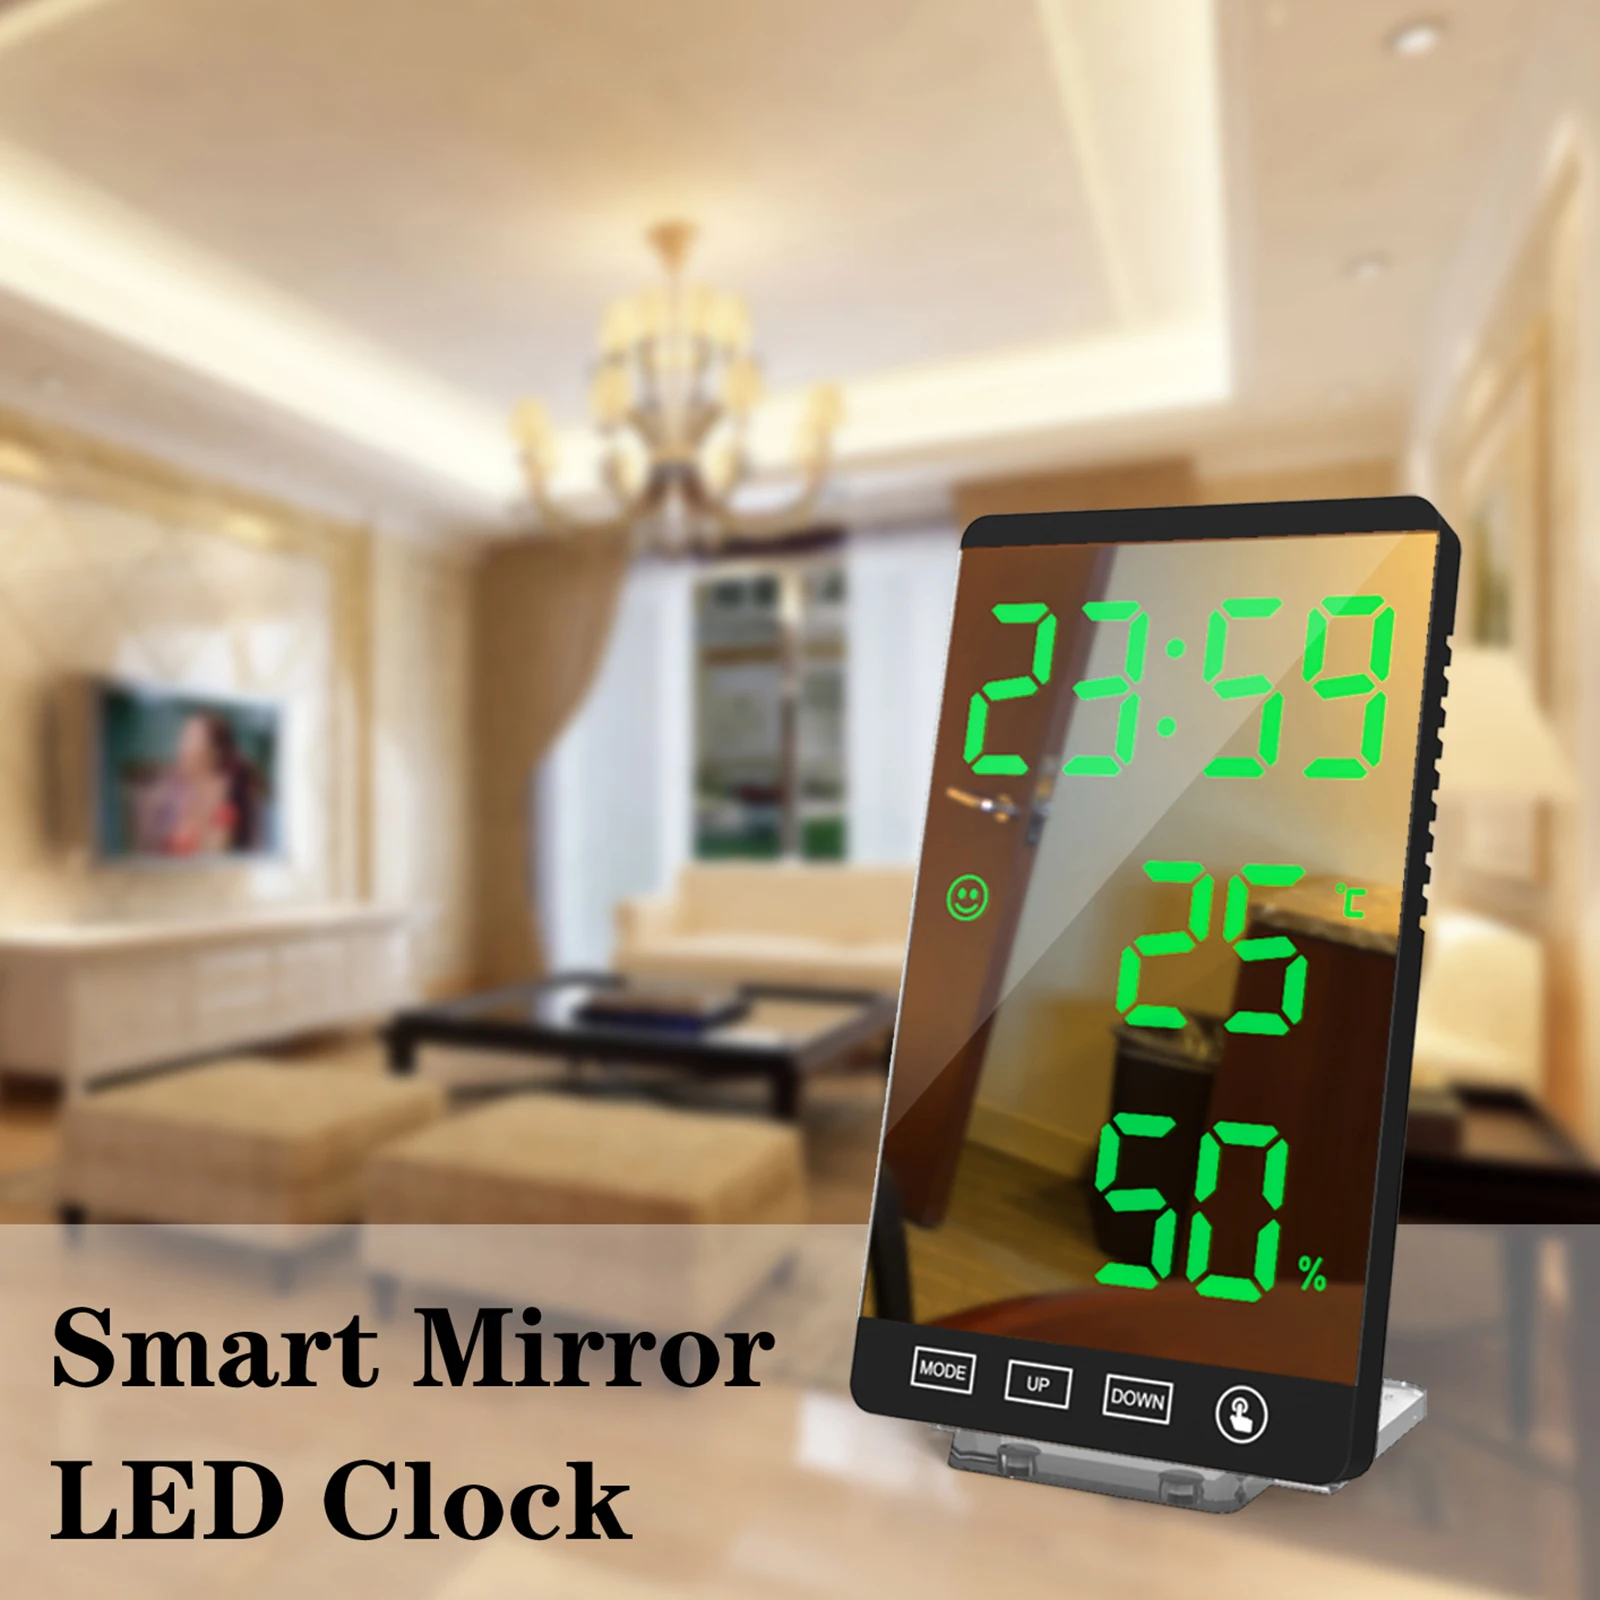 NEW 6 Inch LED Alarm Clock Snooze Calendar Thermometer Display Home Clock